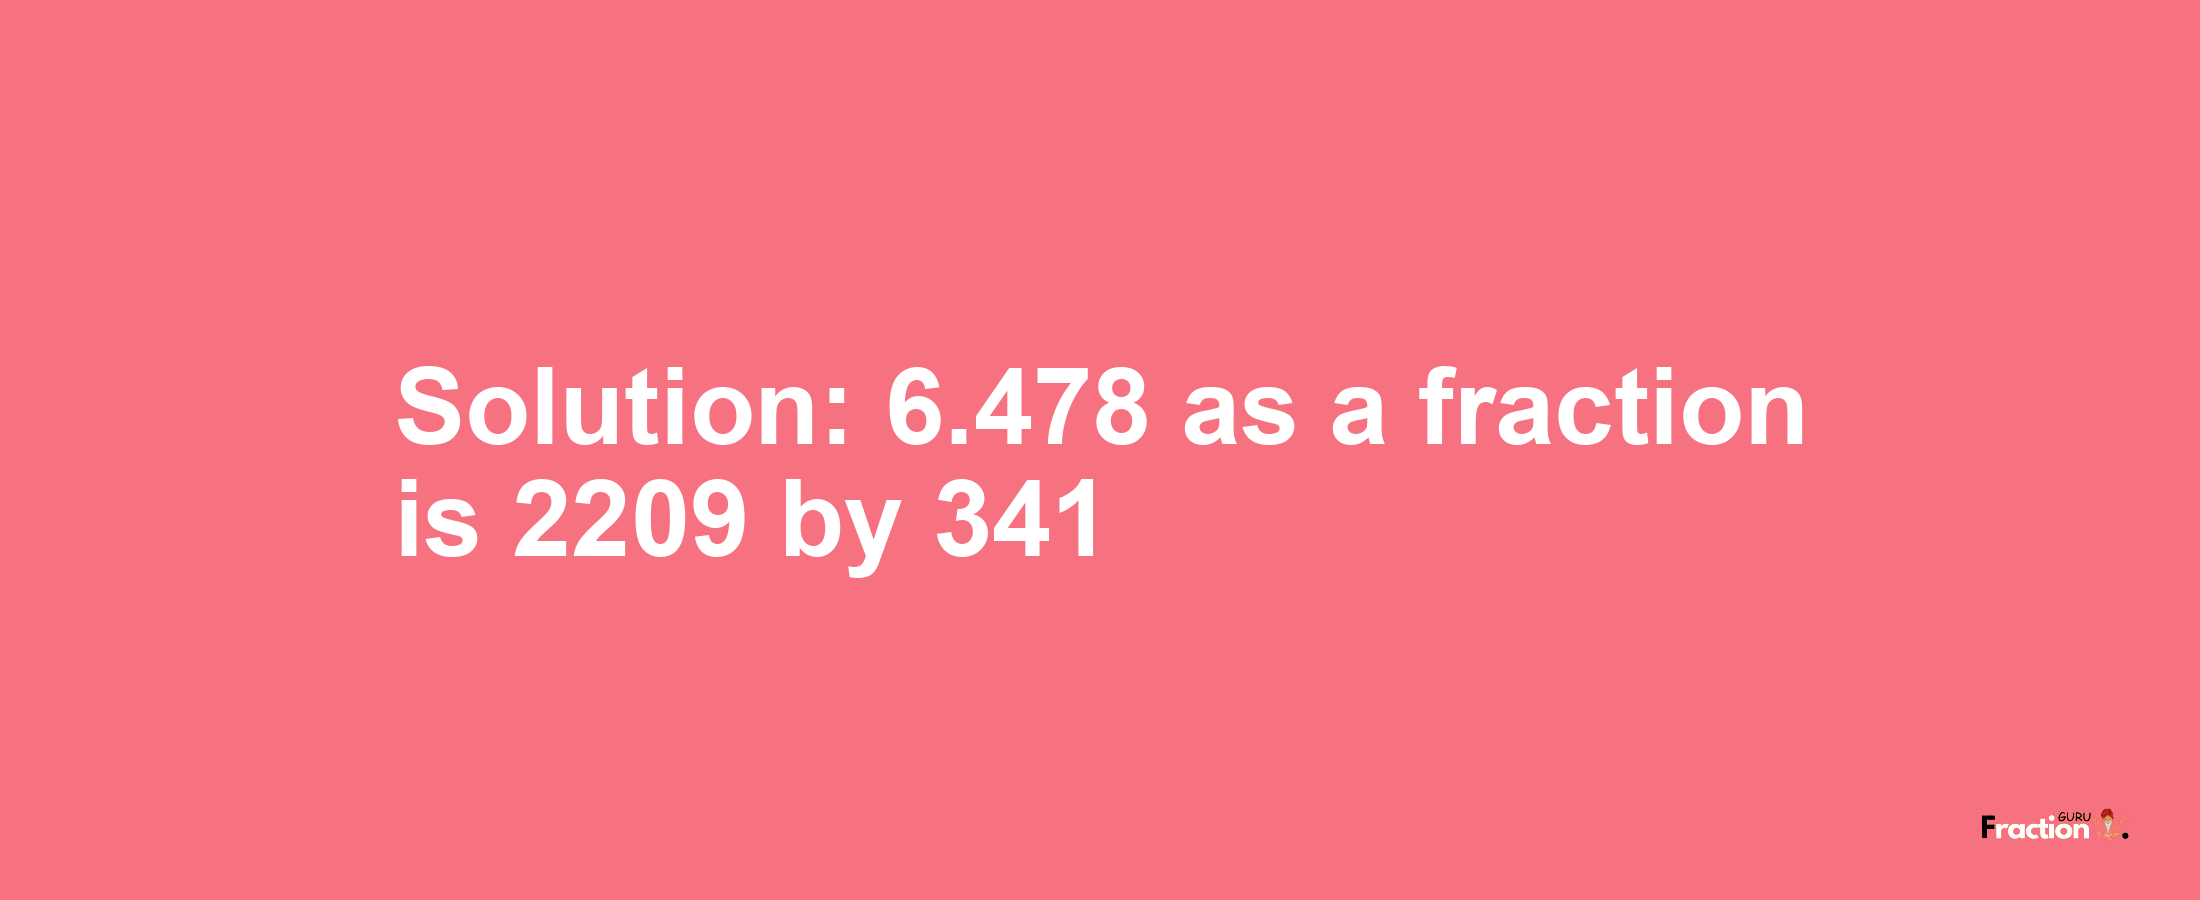 Solution:6.478 as a fraction is 2209/341